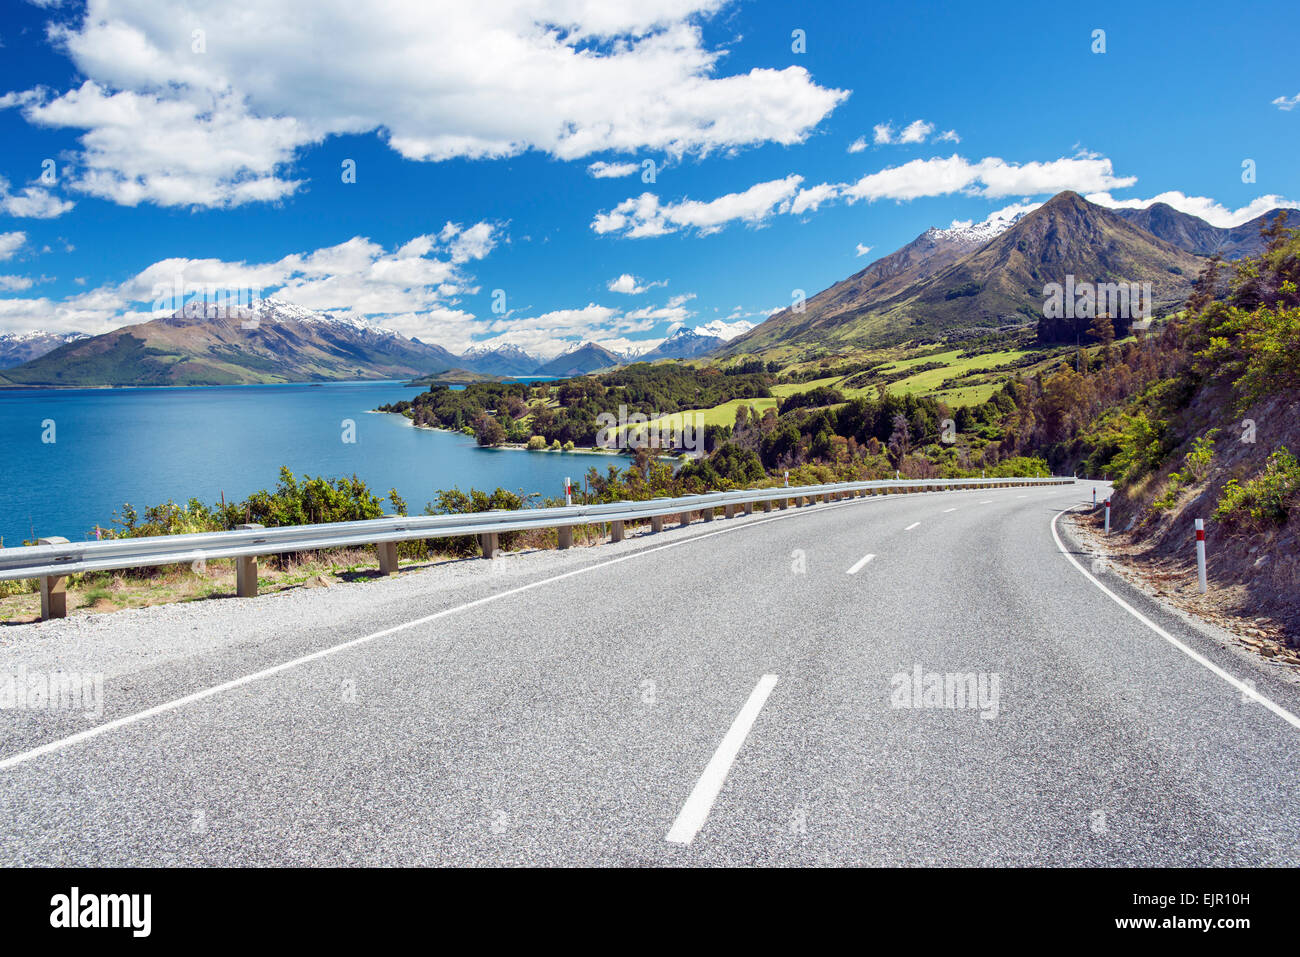 The Glenorchy Queenstown road running through farmlands and between Lake Wakatipu and the mountains Stock Photo